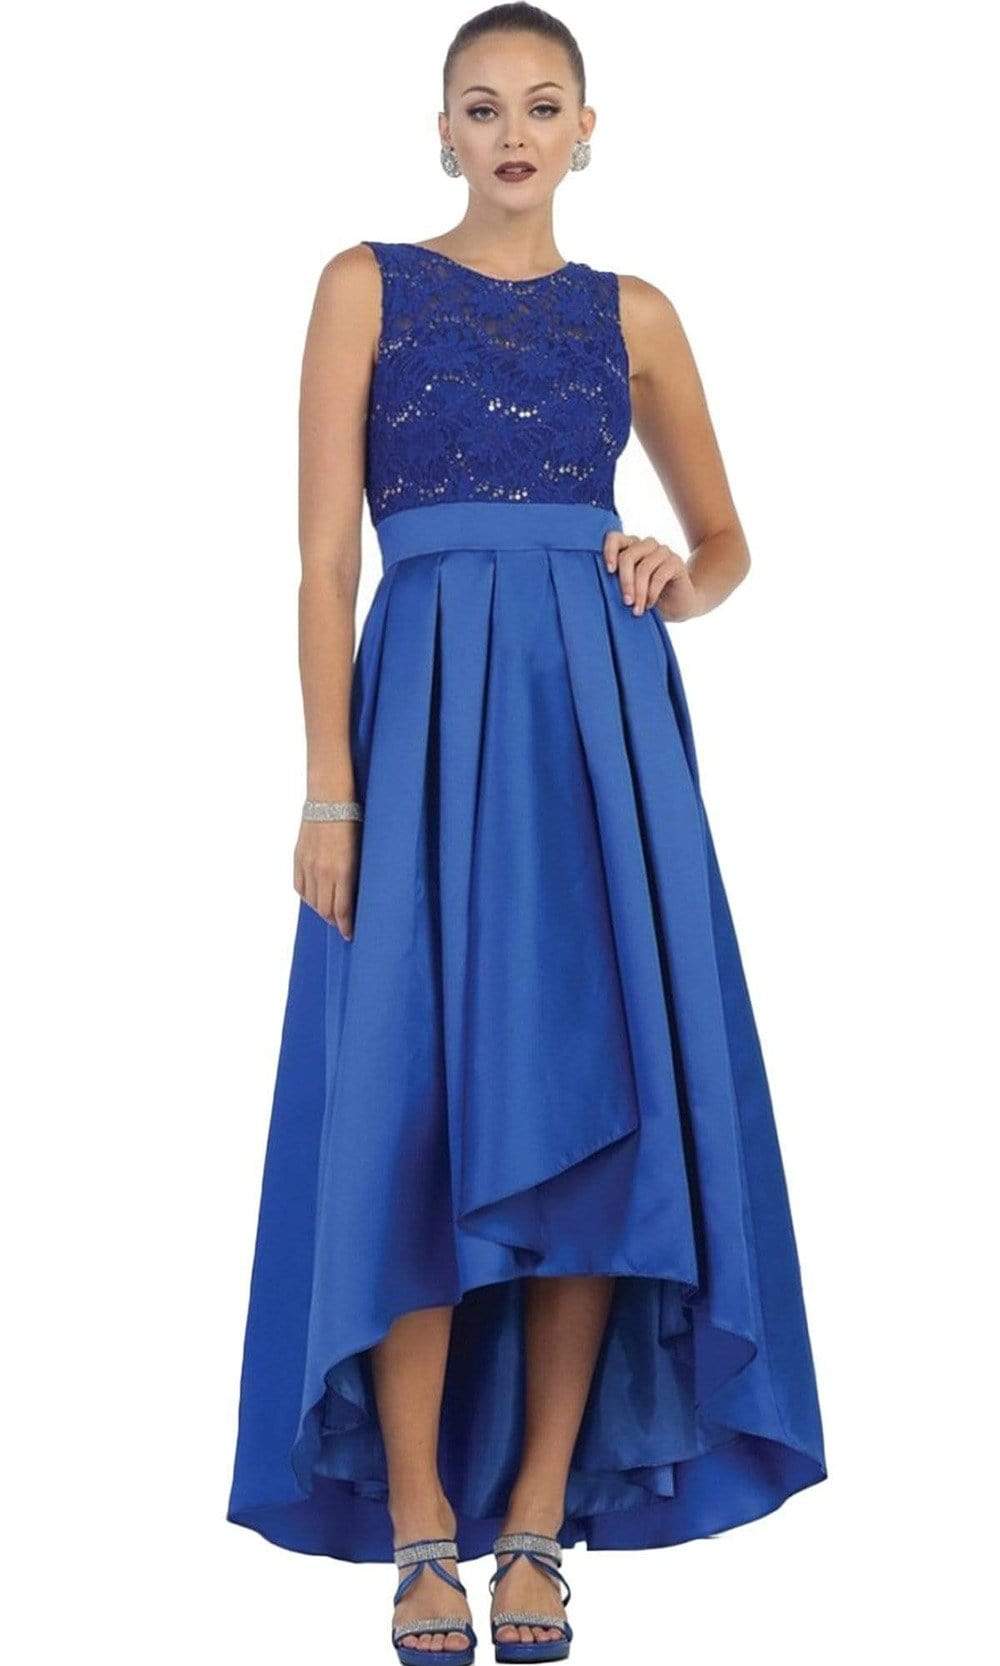 May Queen - High Low Illusion Jewel A-line Evening Dress Special Occasion Dress 4 / Royal